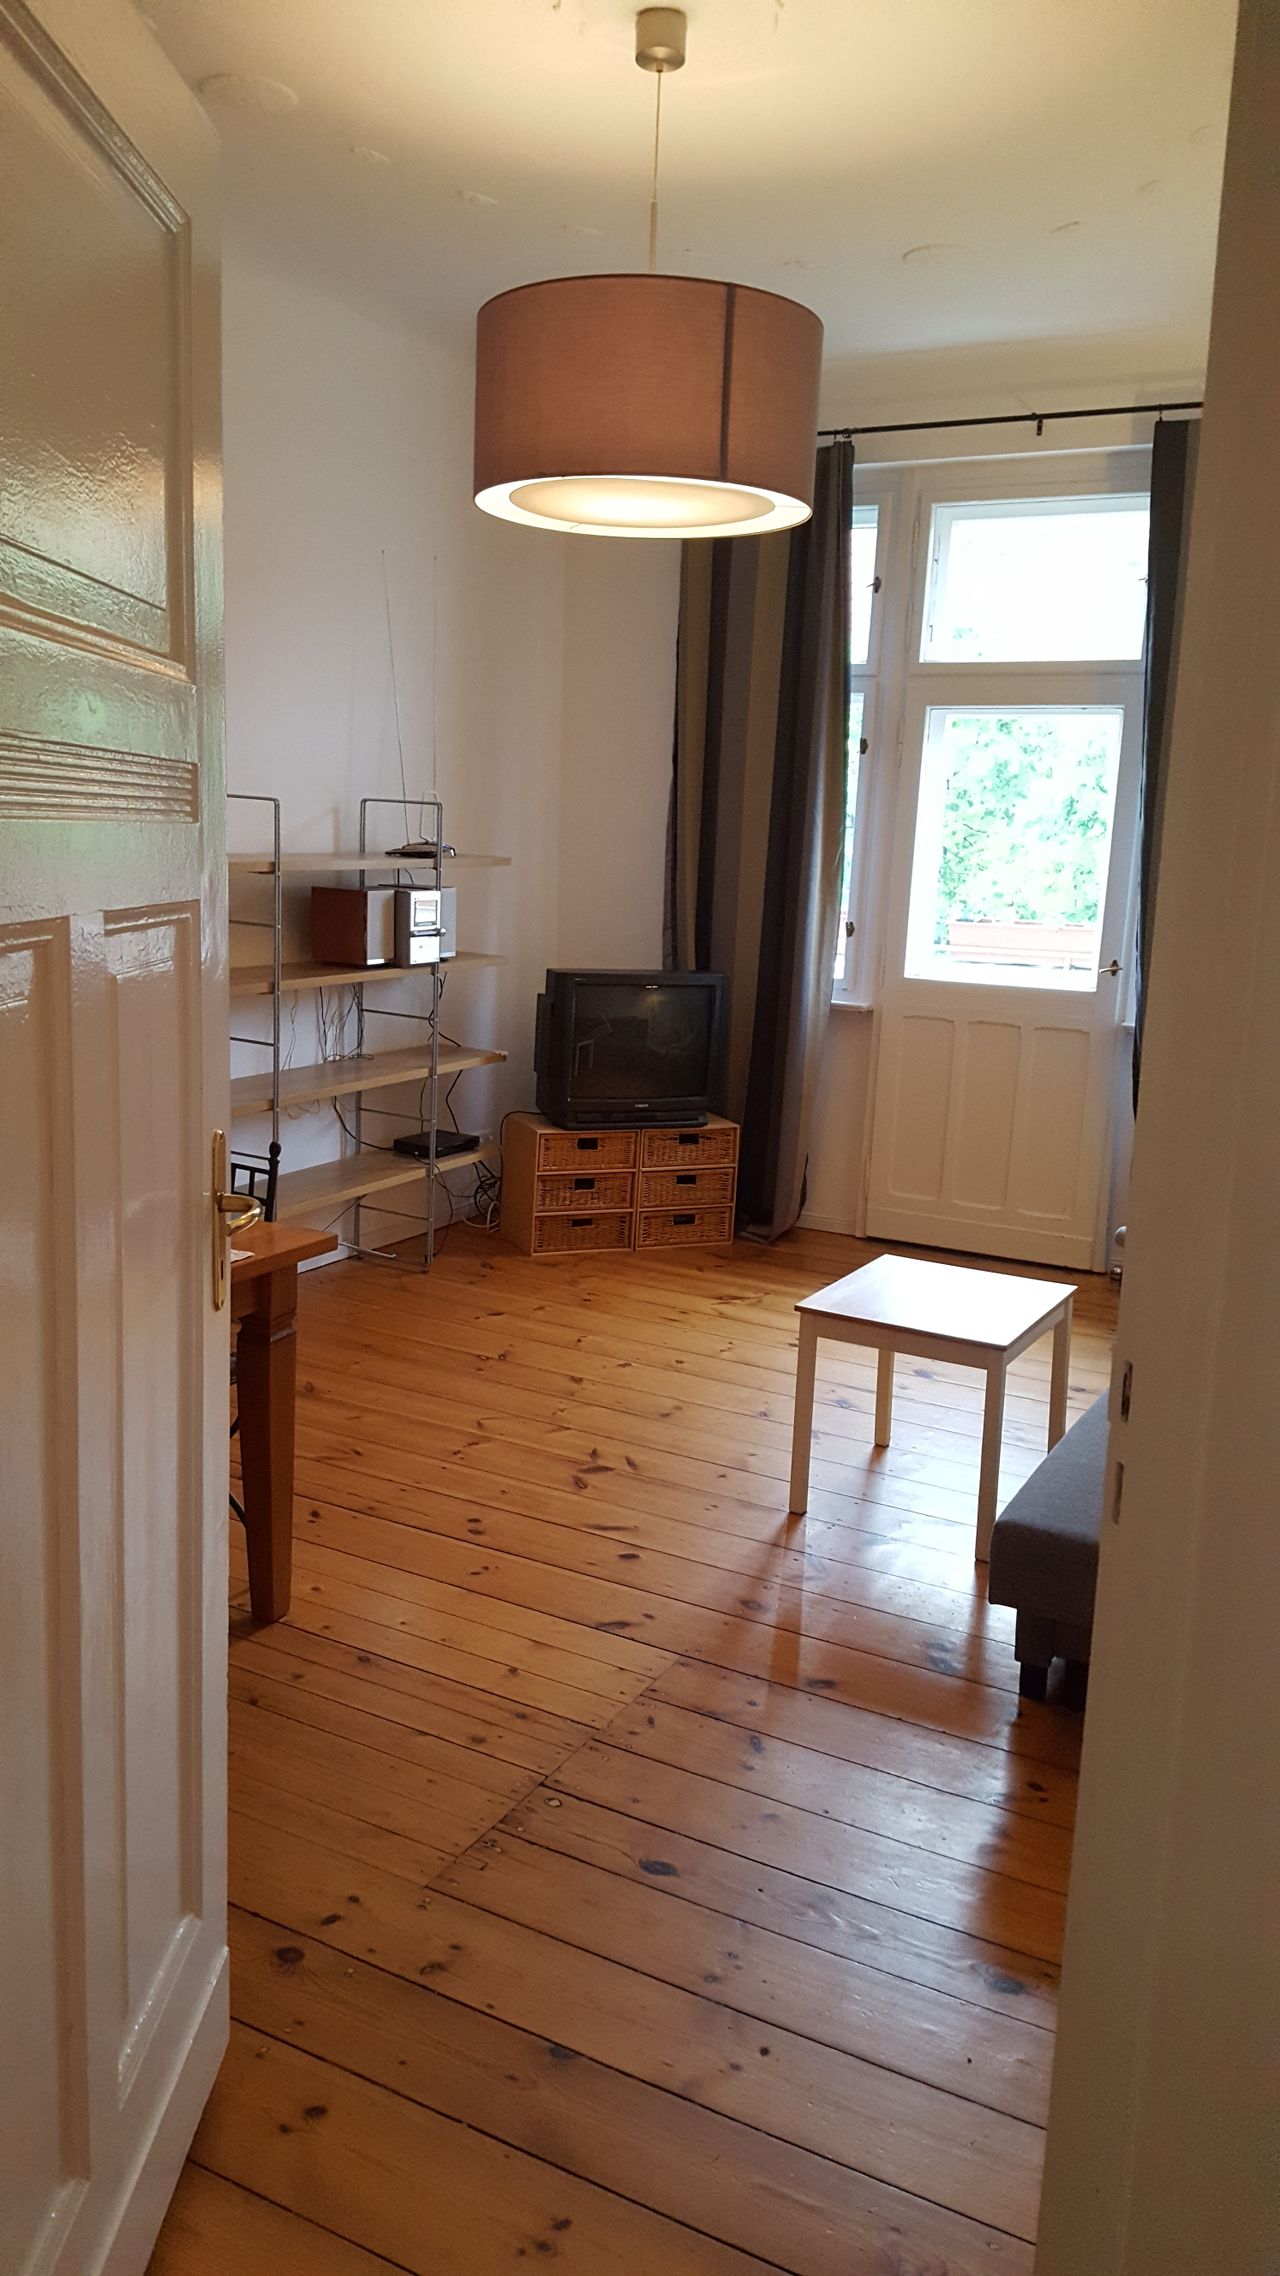 Family-friendly flat with elevator and balcony in prime Friedrichshain